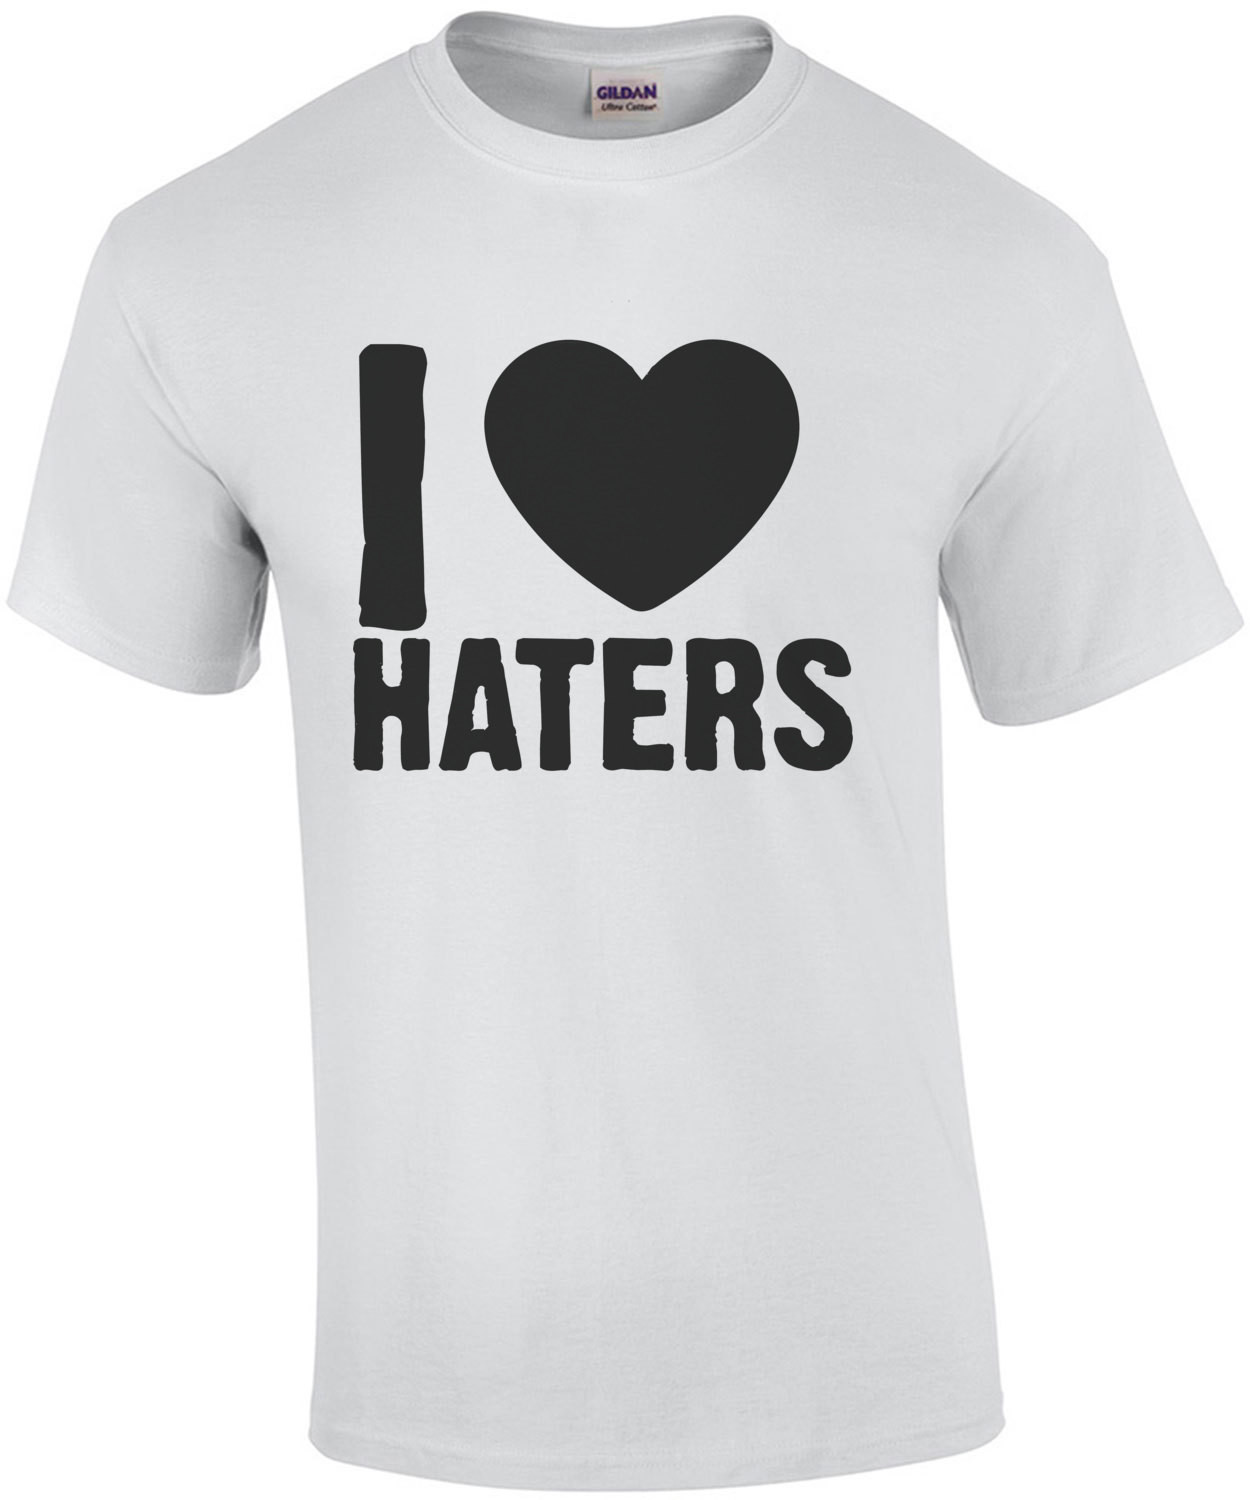 I love (heart) haters - funny t-shirt